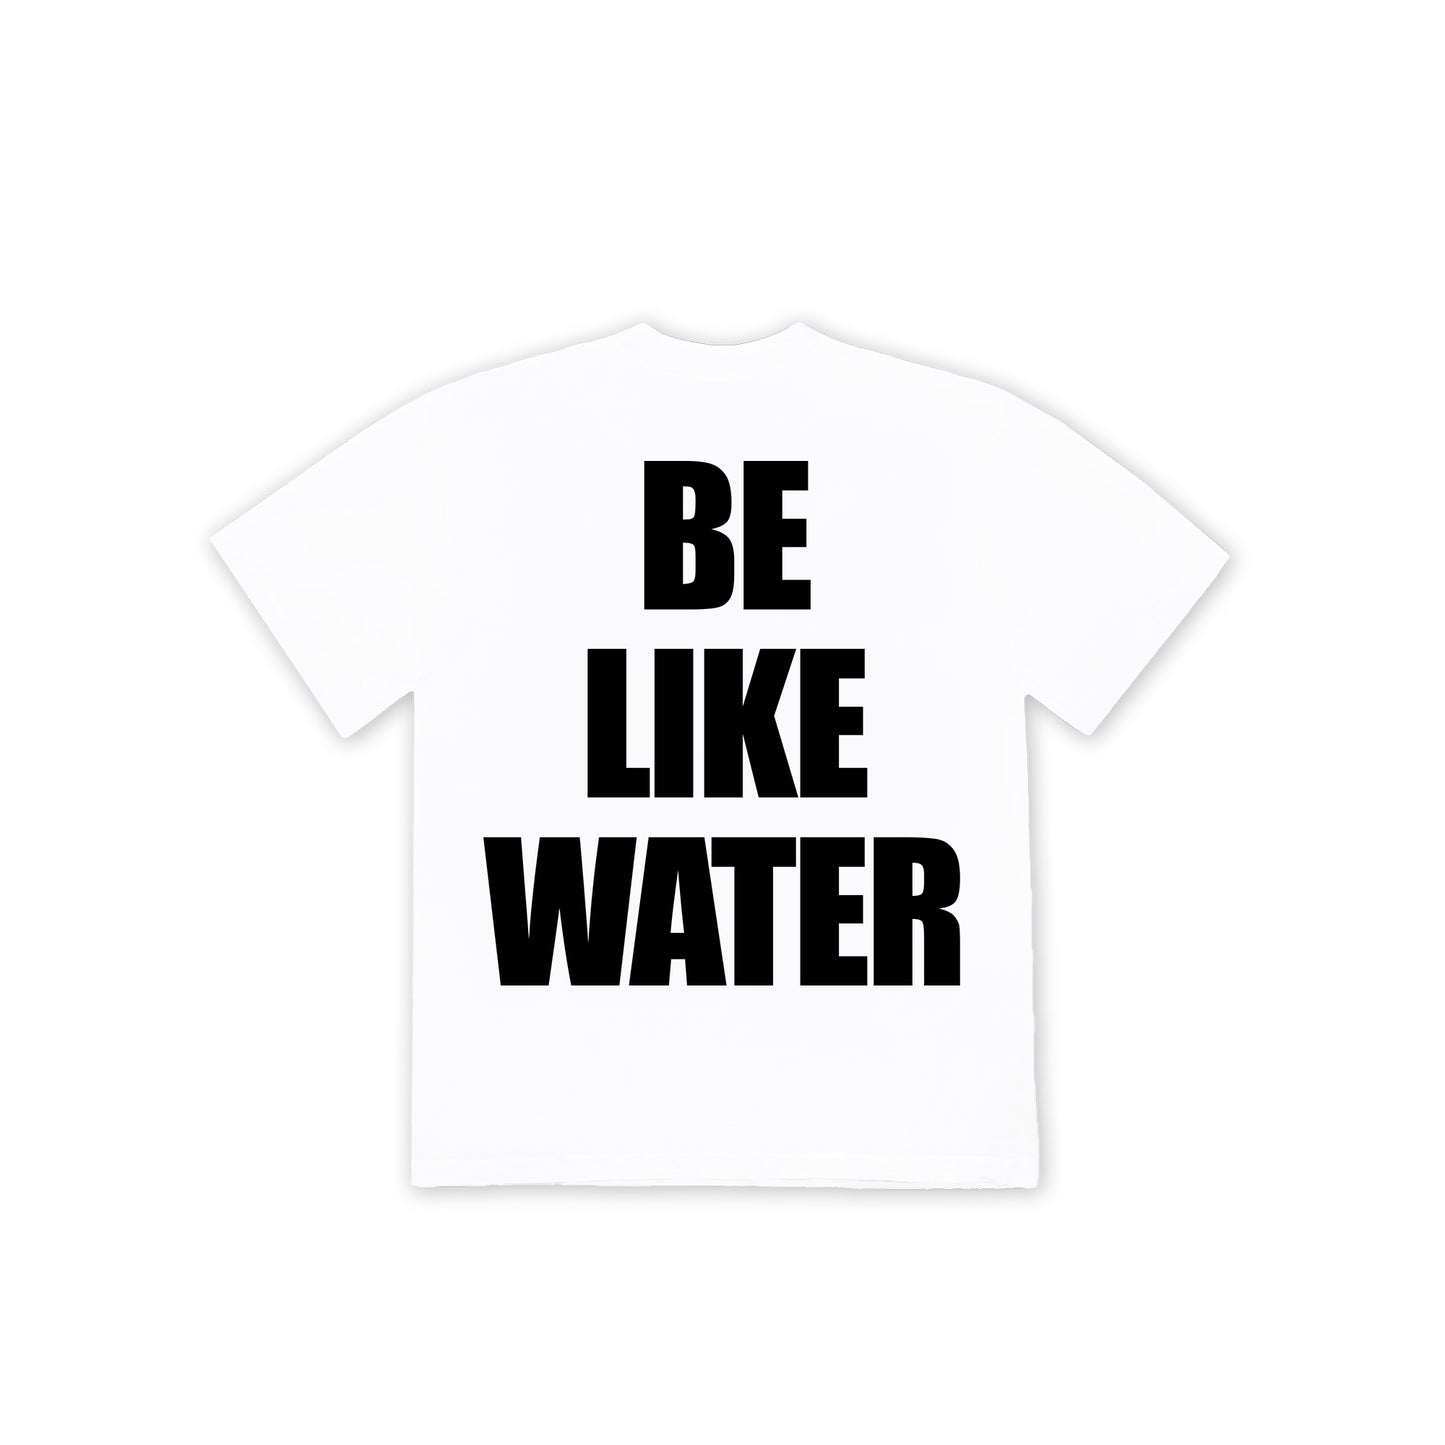 UNCIVILIZED "BE LIKE WATER" T-SHIRT